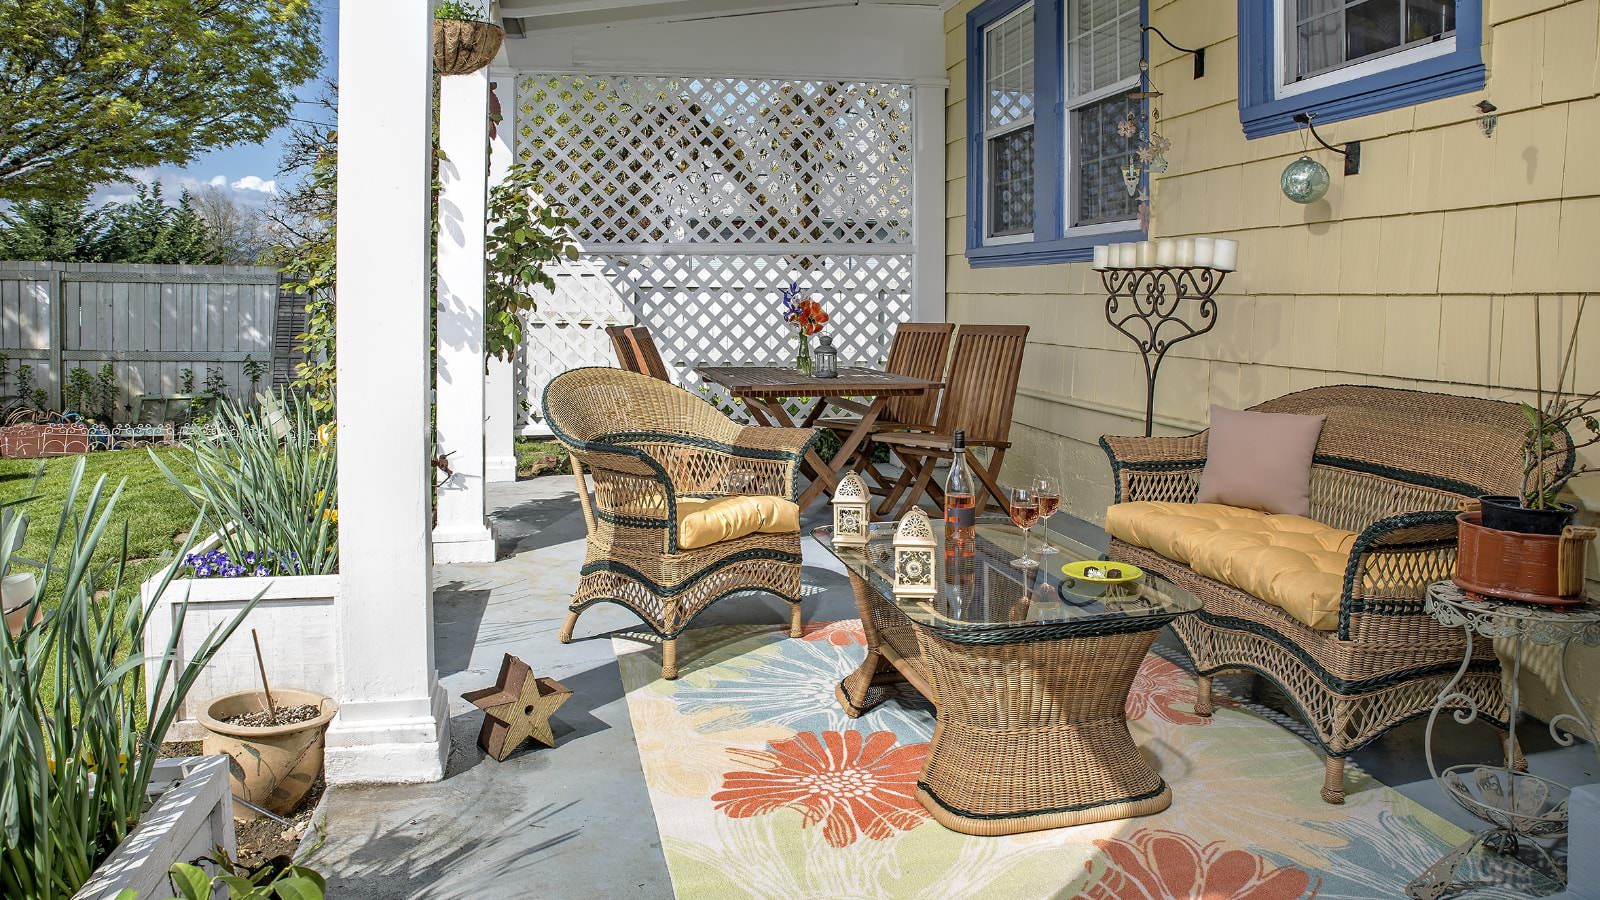 Porch with light colored wicker patio furniture and multicolored area rug surrounded by green grass and flowers